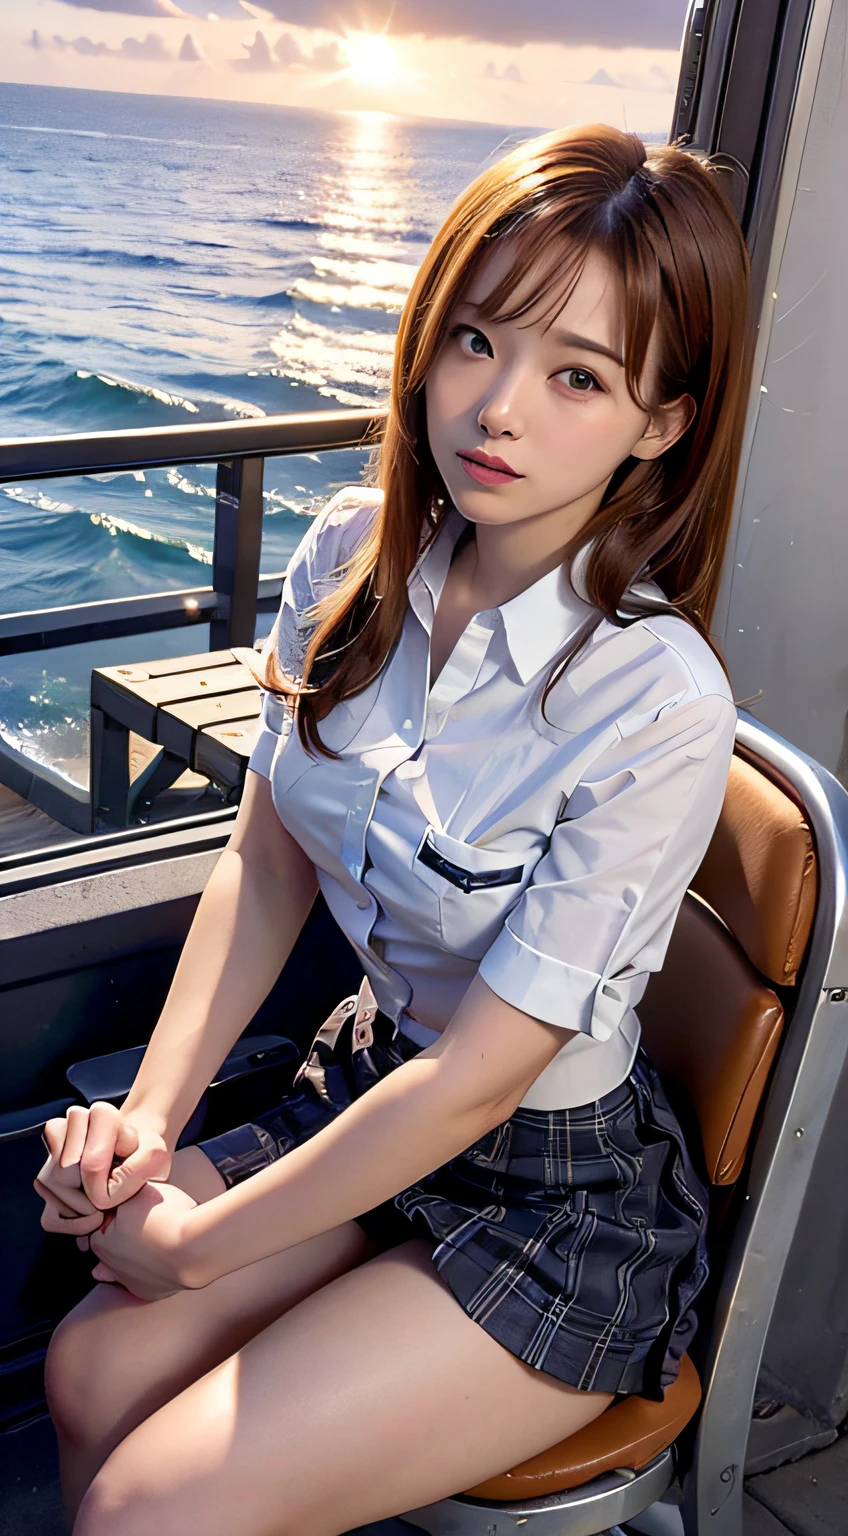 (Best Quality, High resolution, masutepiece :1.3), Pretty women,
Shunguang,Against the background of orangey sunset sky、Clouds and sun sink into the ocean, Beautiful  in uniform sitting. Her hair is light brown, And it's medium bob style. She wears a white blouse and pleated skirt as part of her uniform. She sits with her legs apart, And her gaze is directed to the camera. Create this scene from a low angle shot.